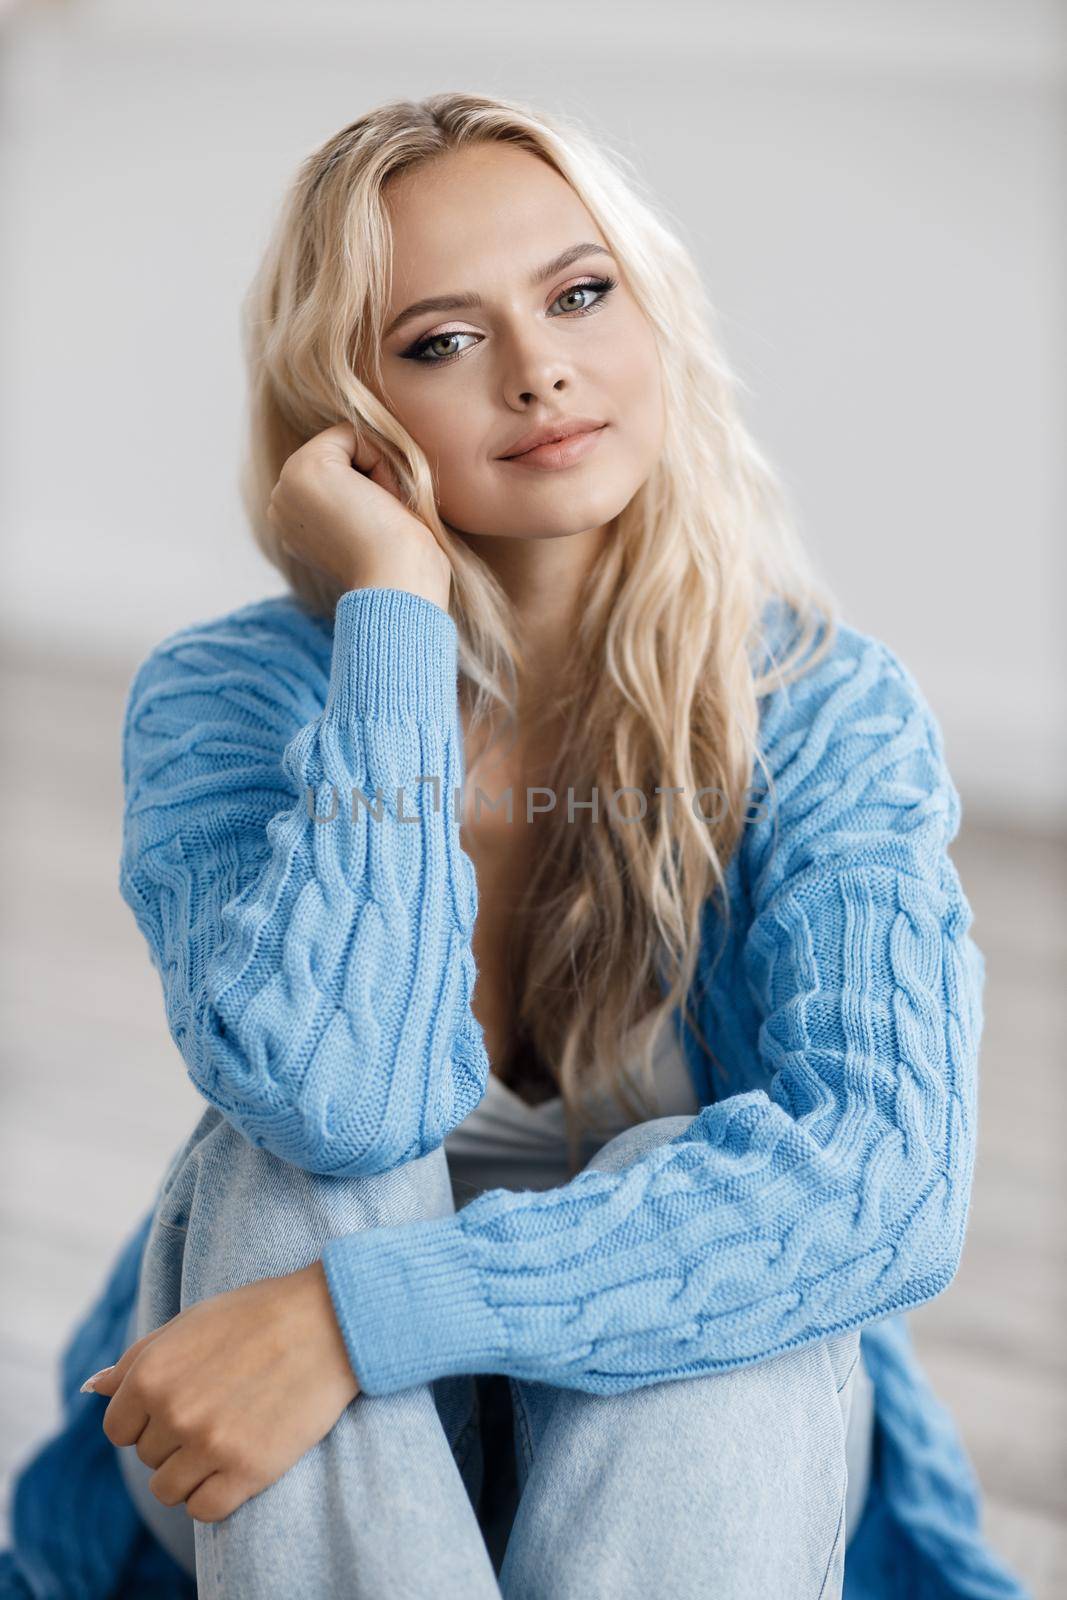 Young beautiful woman portrait indoor . High quality photo